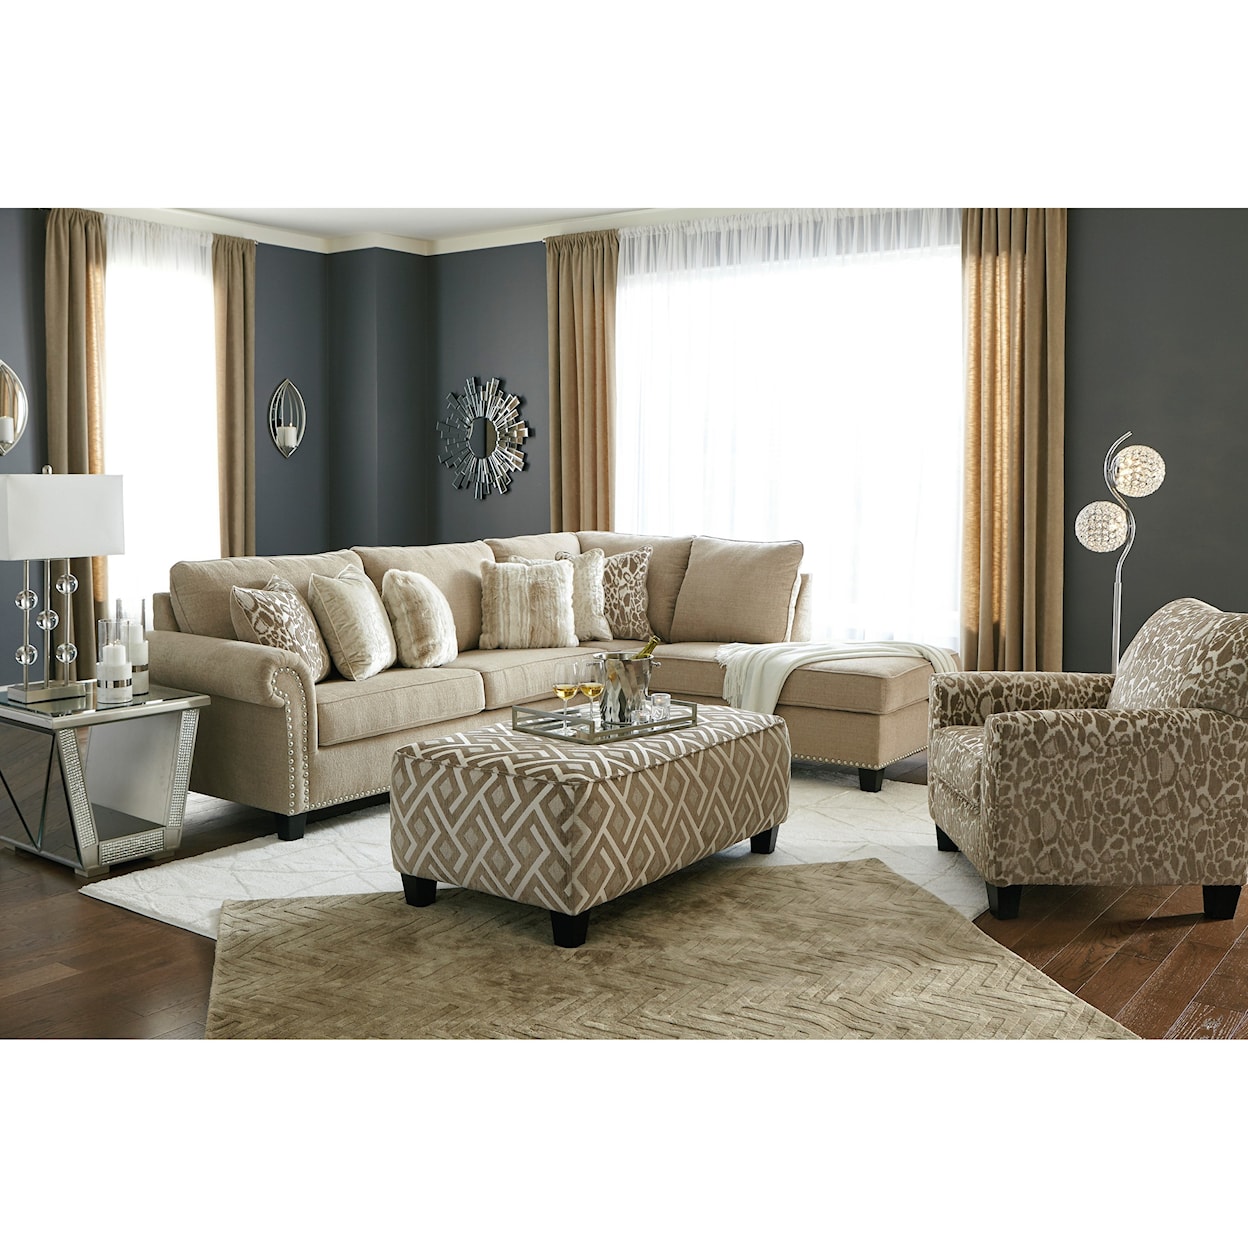 Signature Design by Ashley Dovemont 4pc Living Room Group